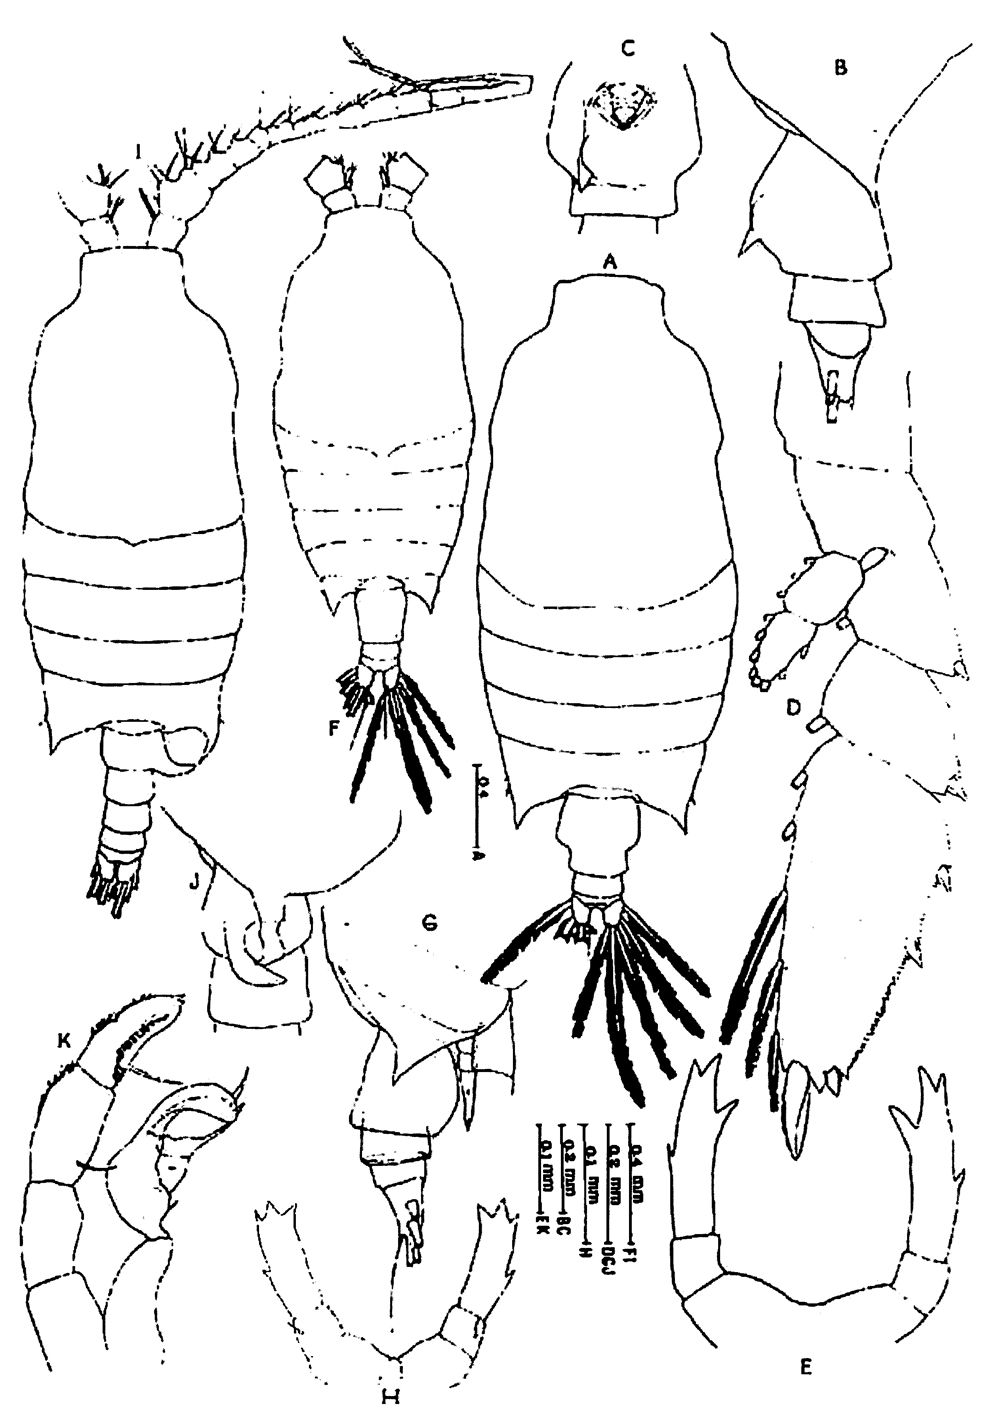 Species Candacia curta - Plate 11 of morphological figures